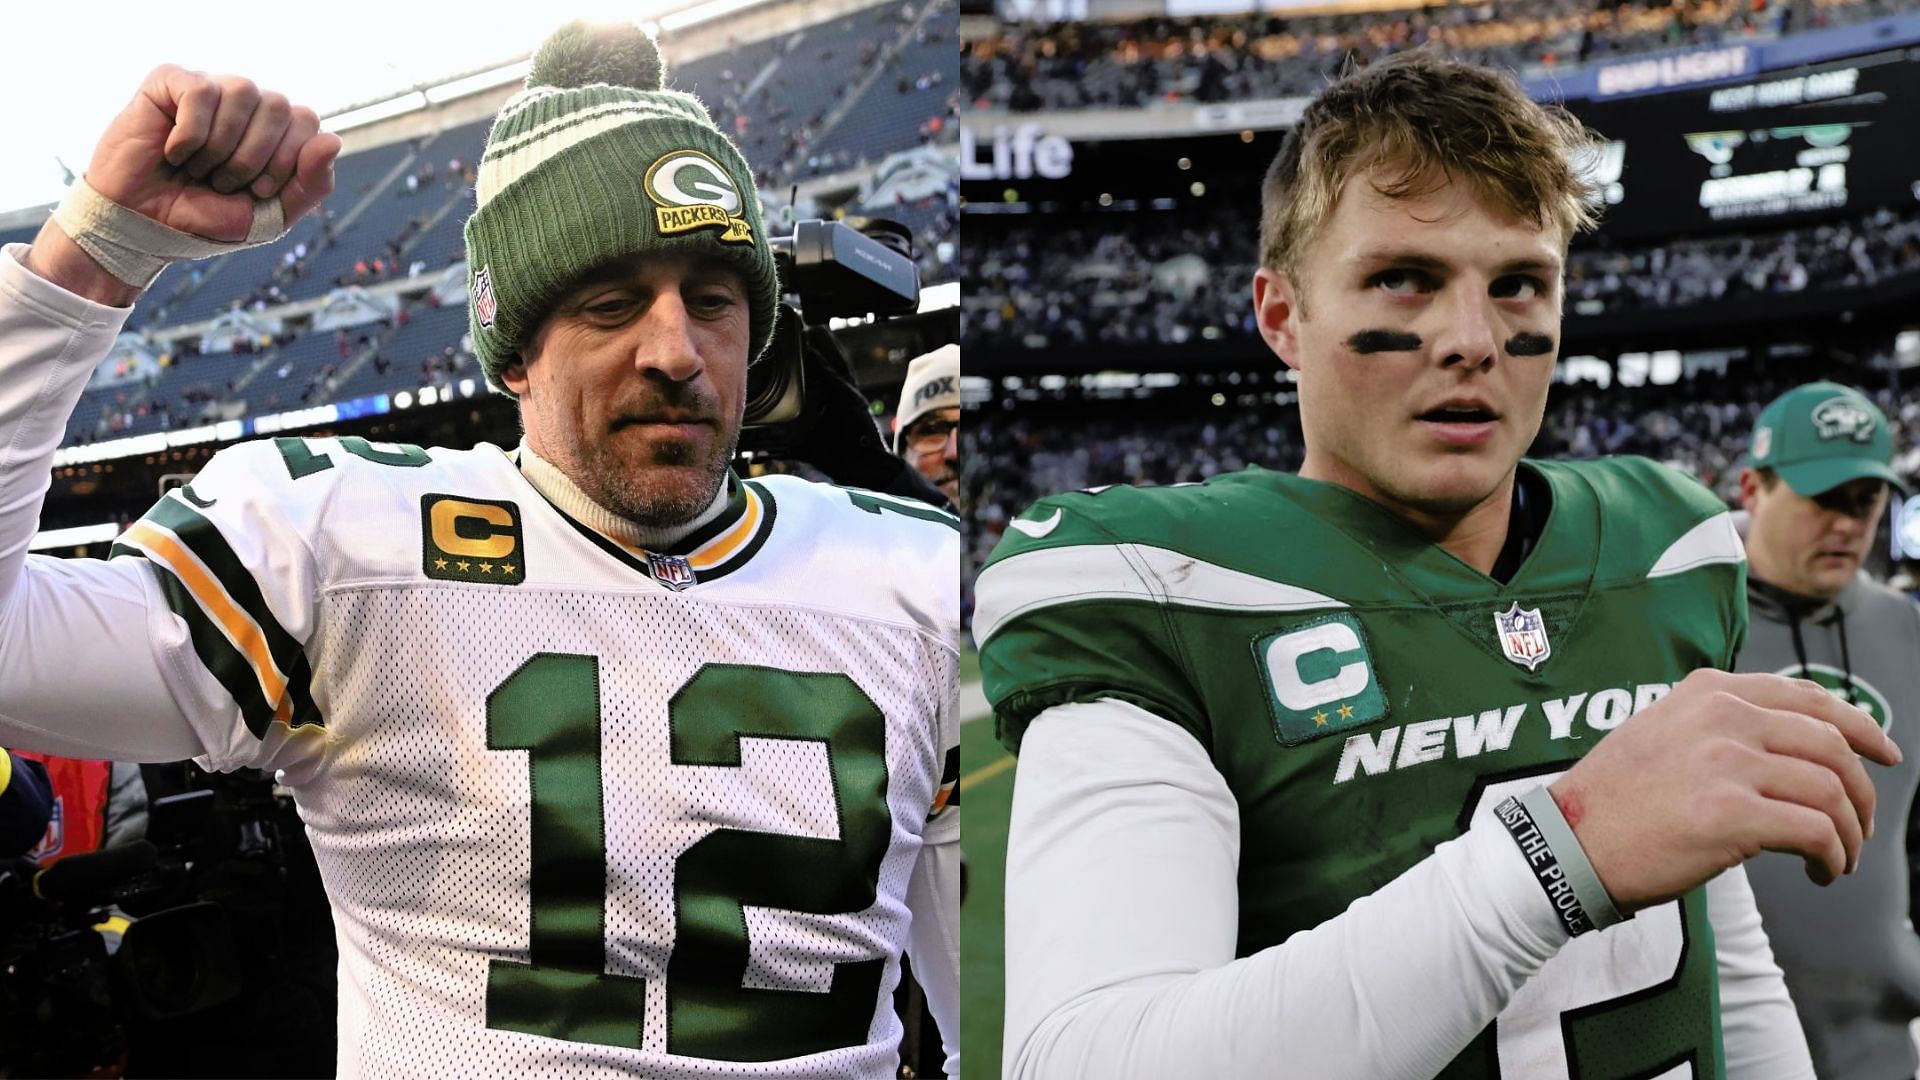 Aaron Rodgers dethrones Zach Wilson as the New York Jets starting quarterback.